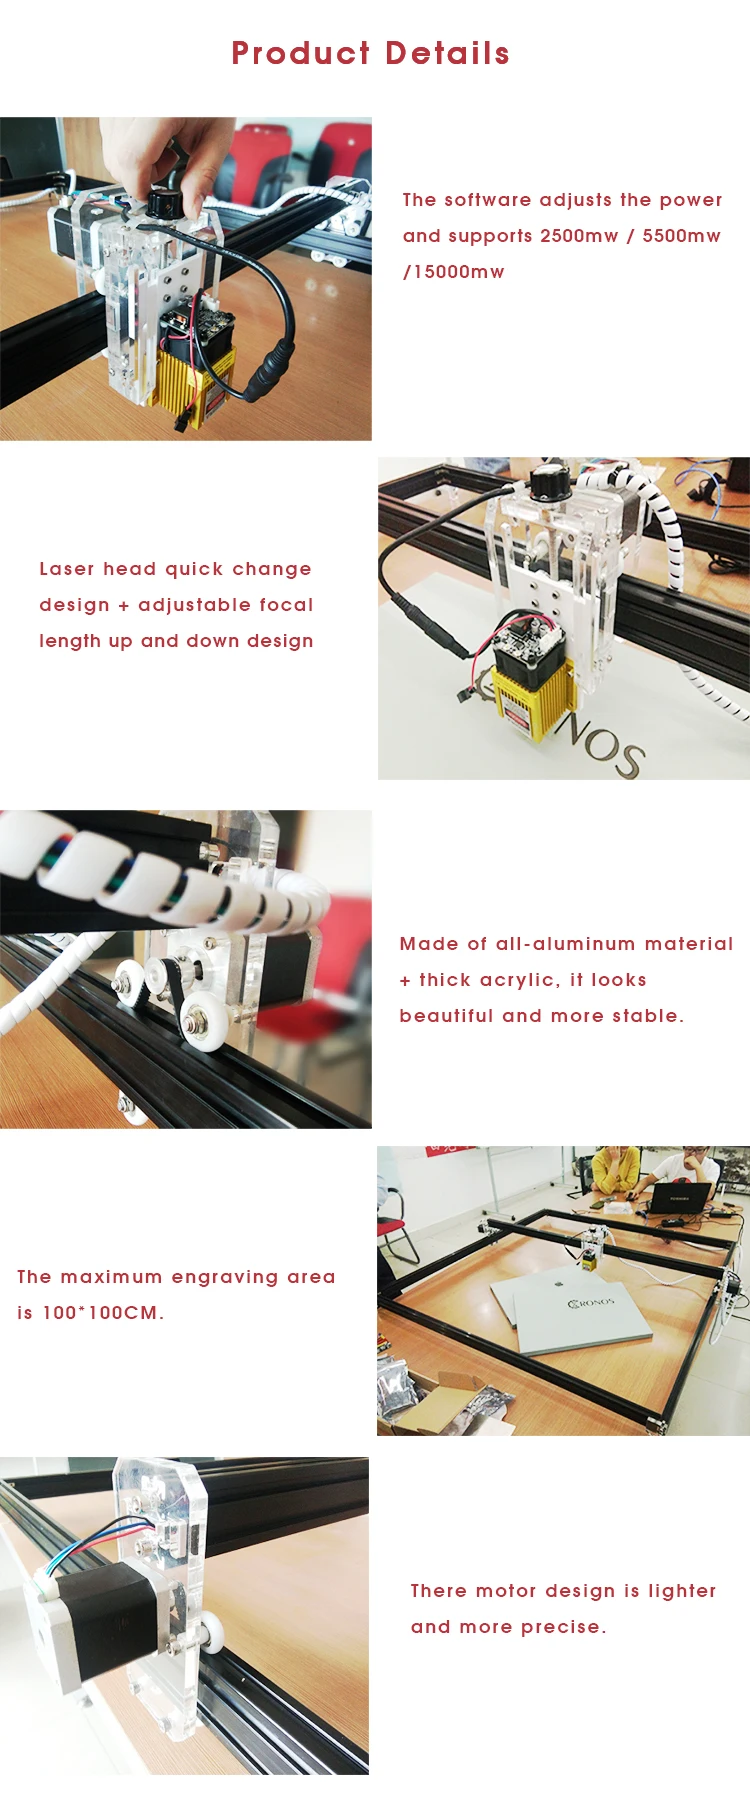 6550 CNC DIY laser engraving cuting machine for stainles steel and wood